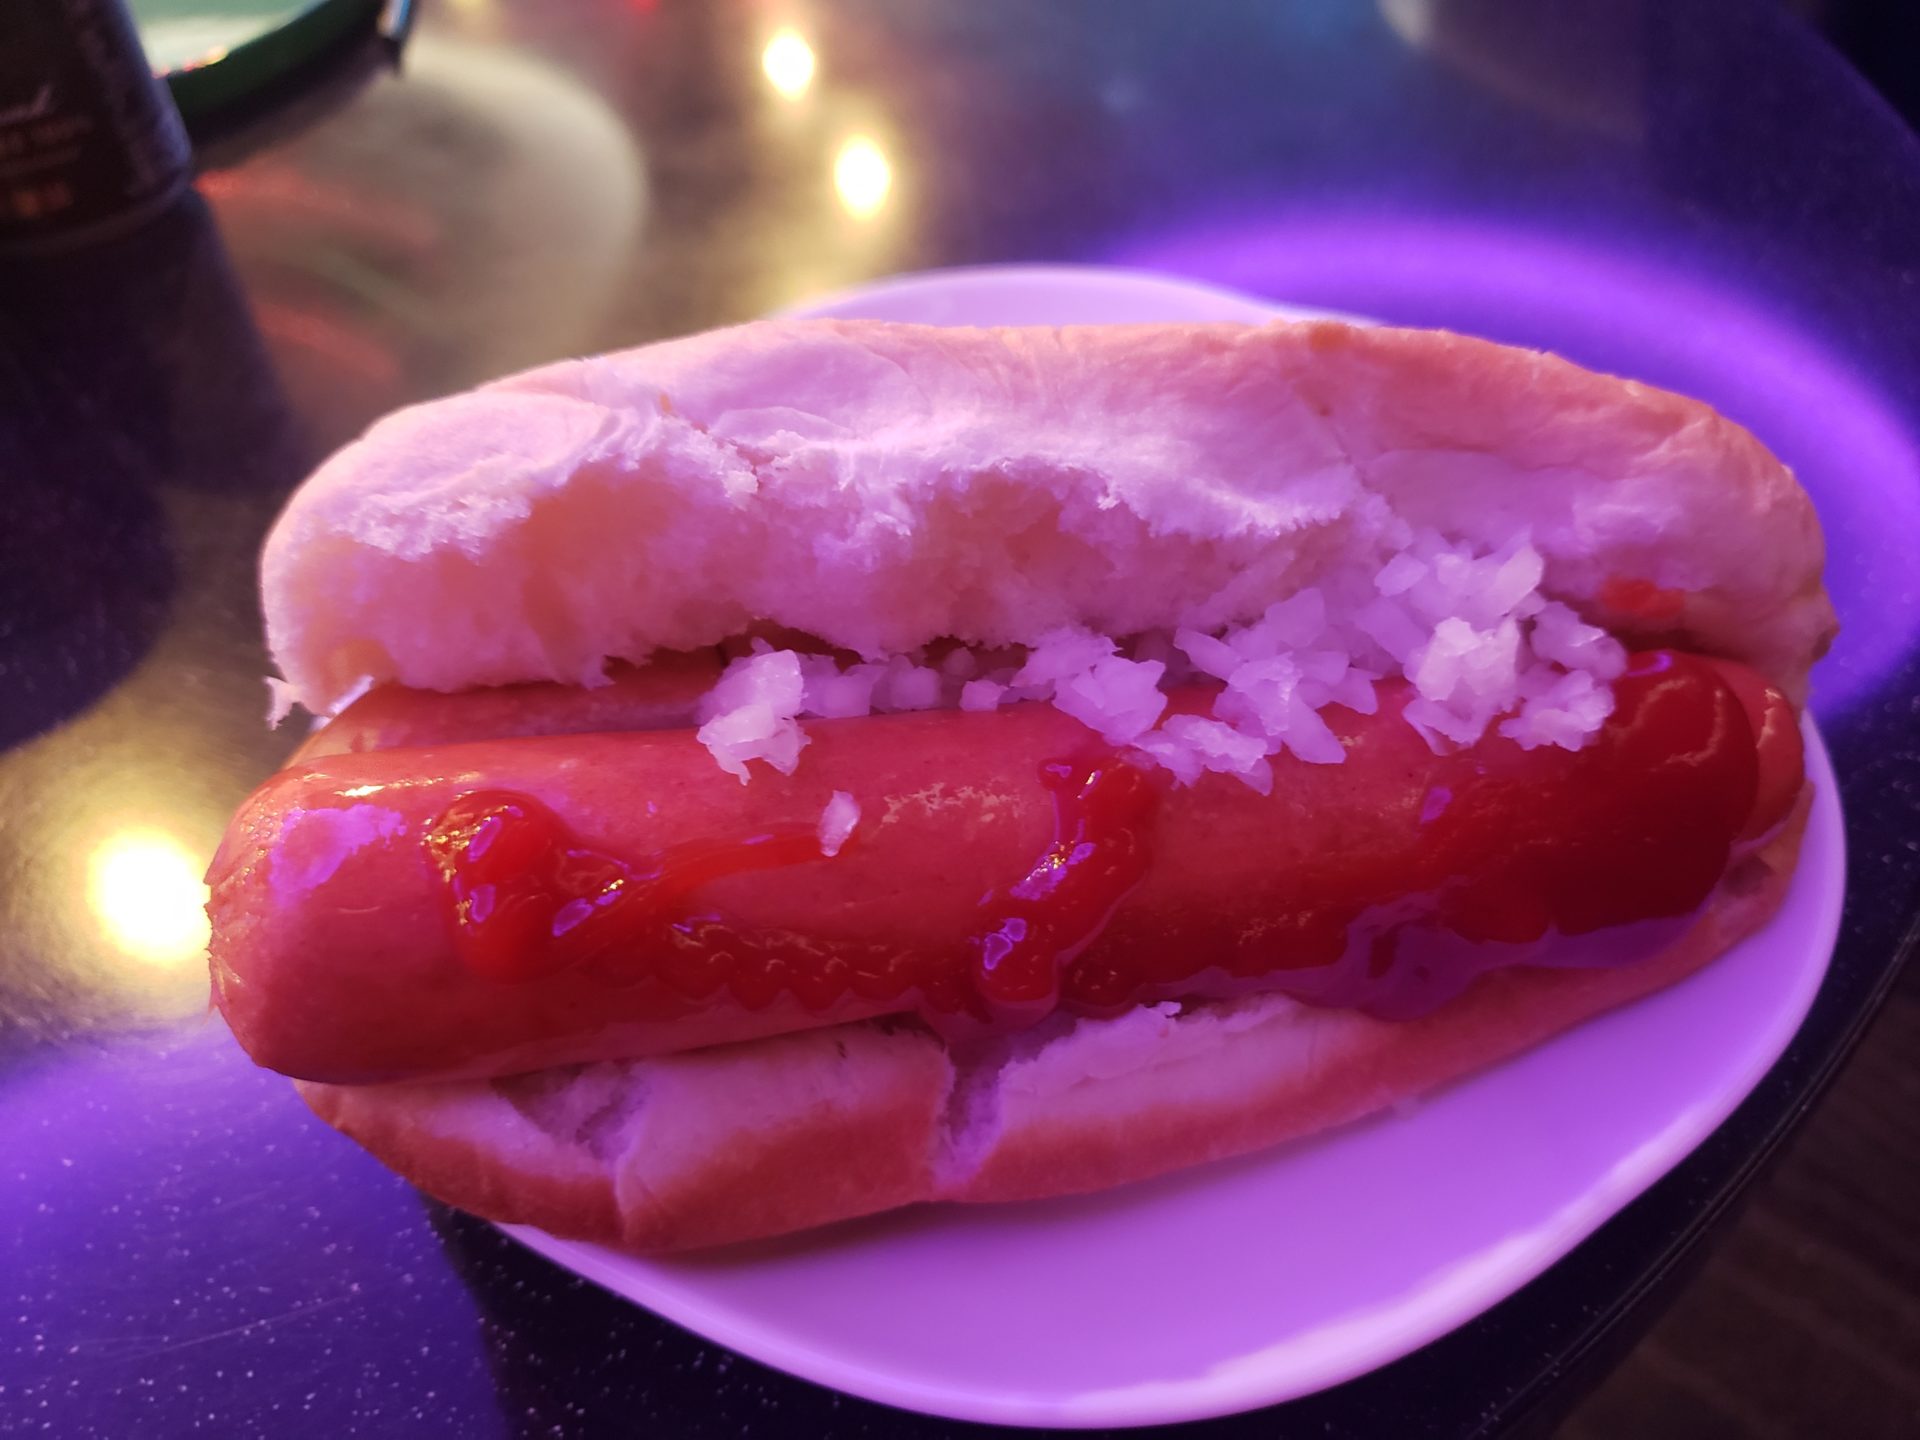 a hot dog with ketchup and rice on a plate